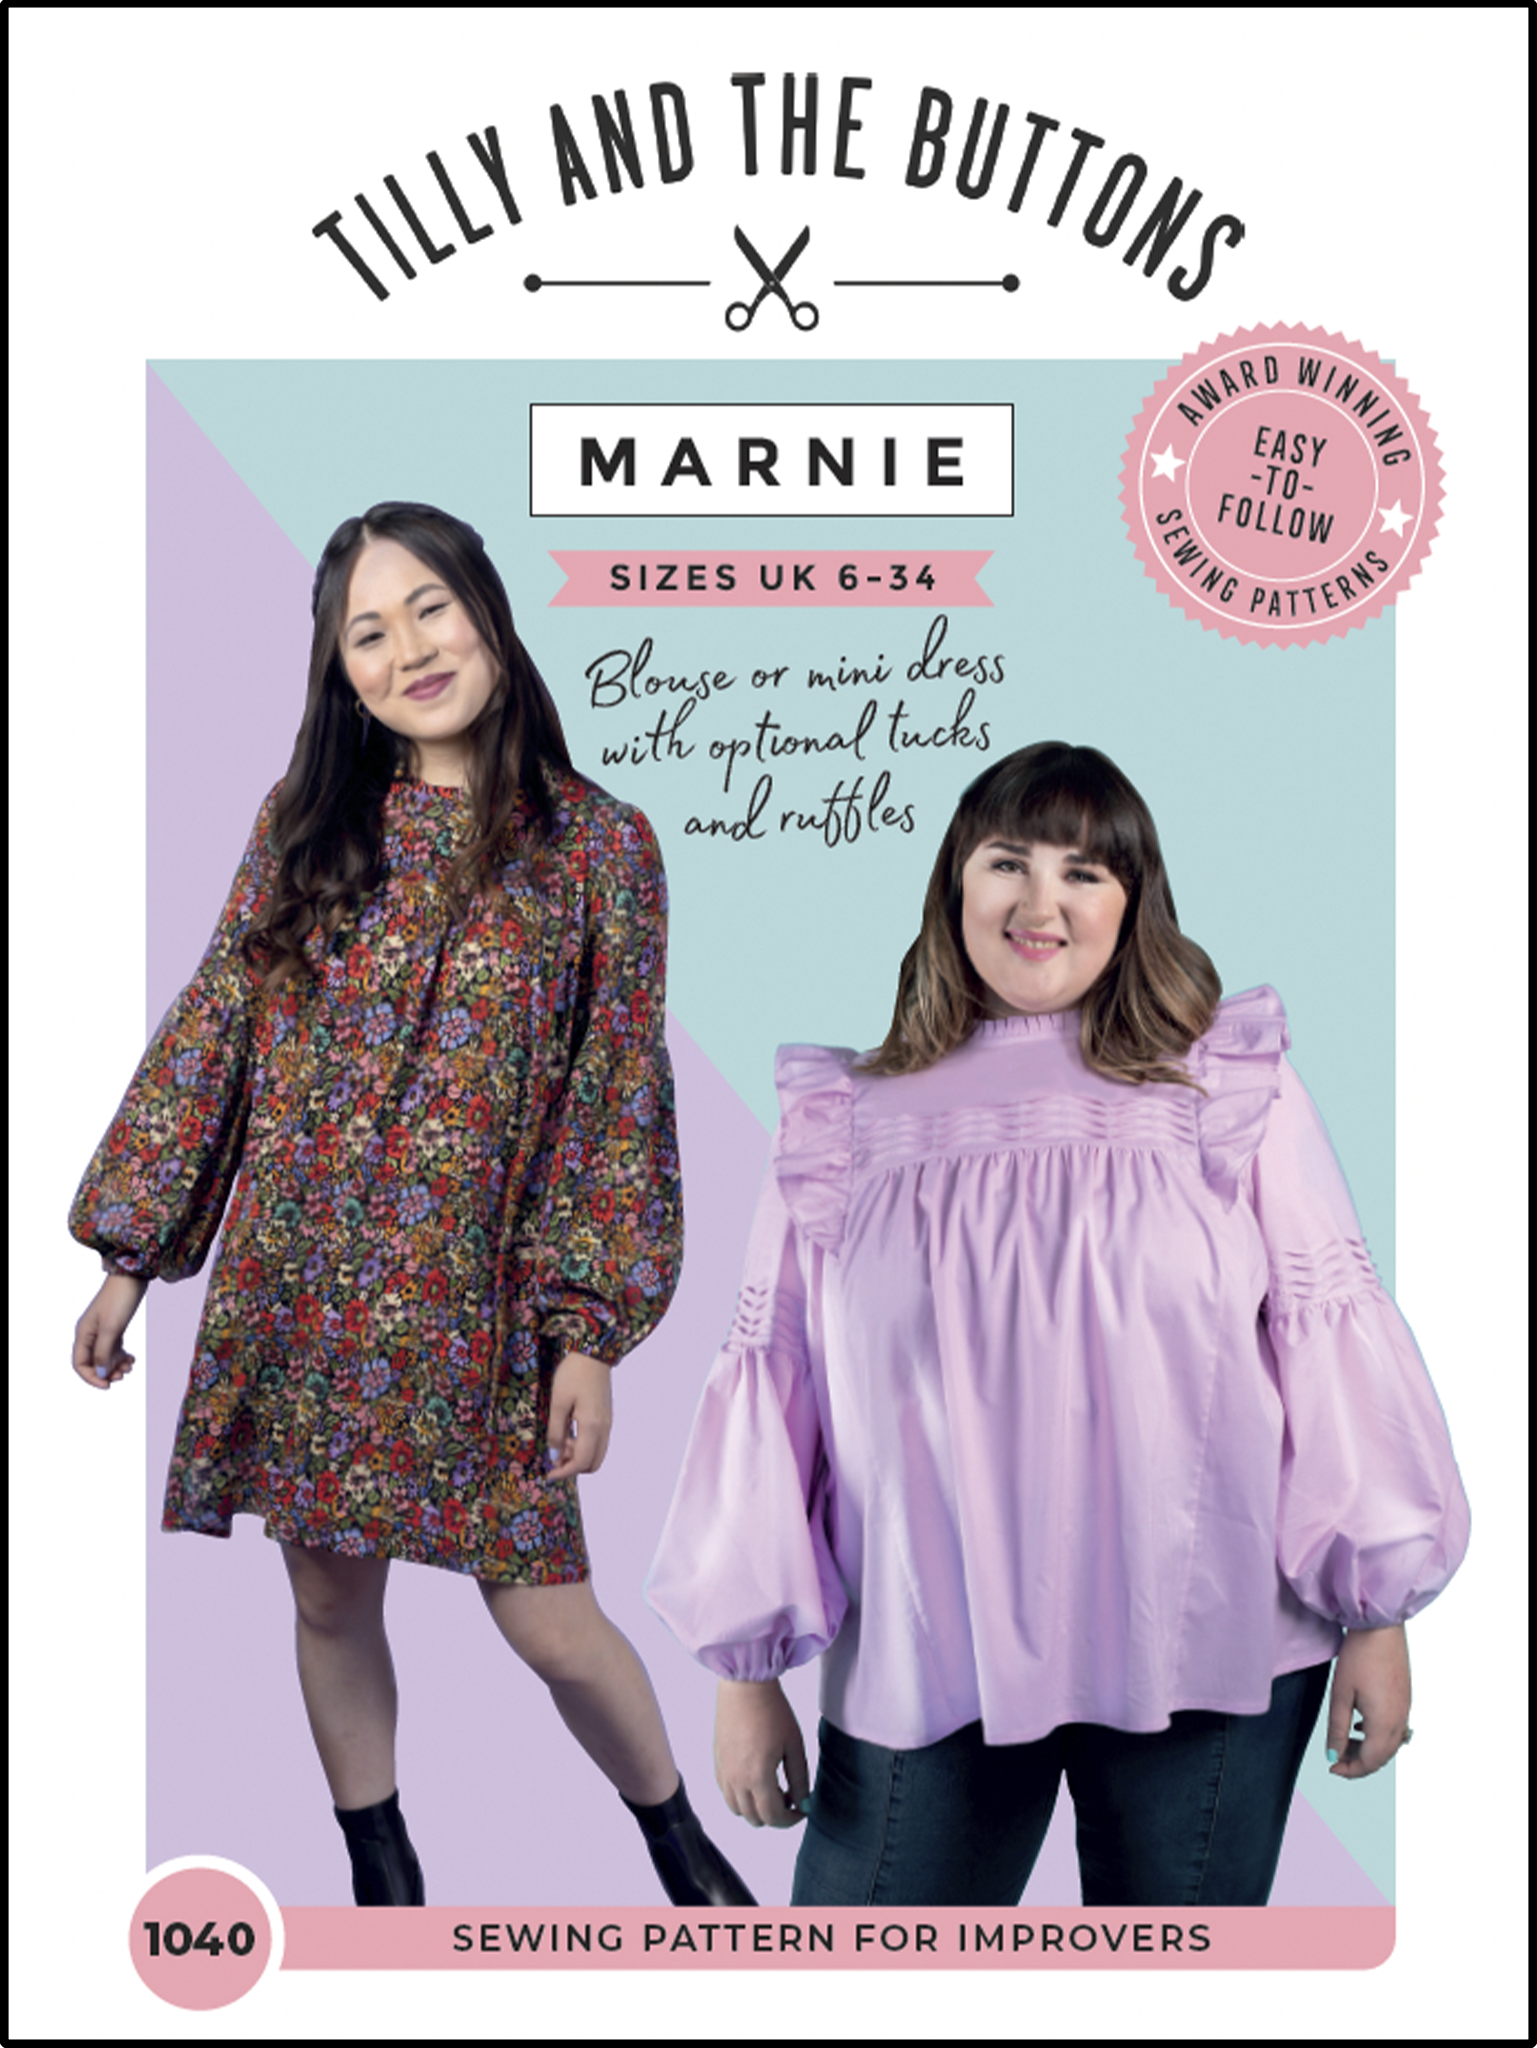 Tilly and the Buttons - Marnie Blouse and Mini Dress Sewing Pattern (6-34)